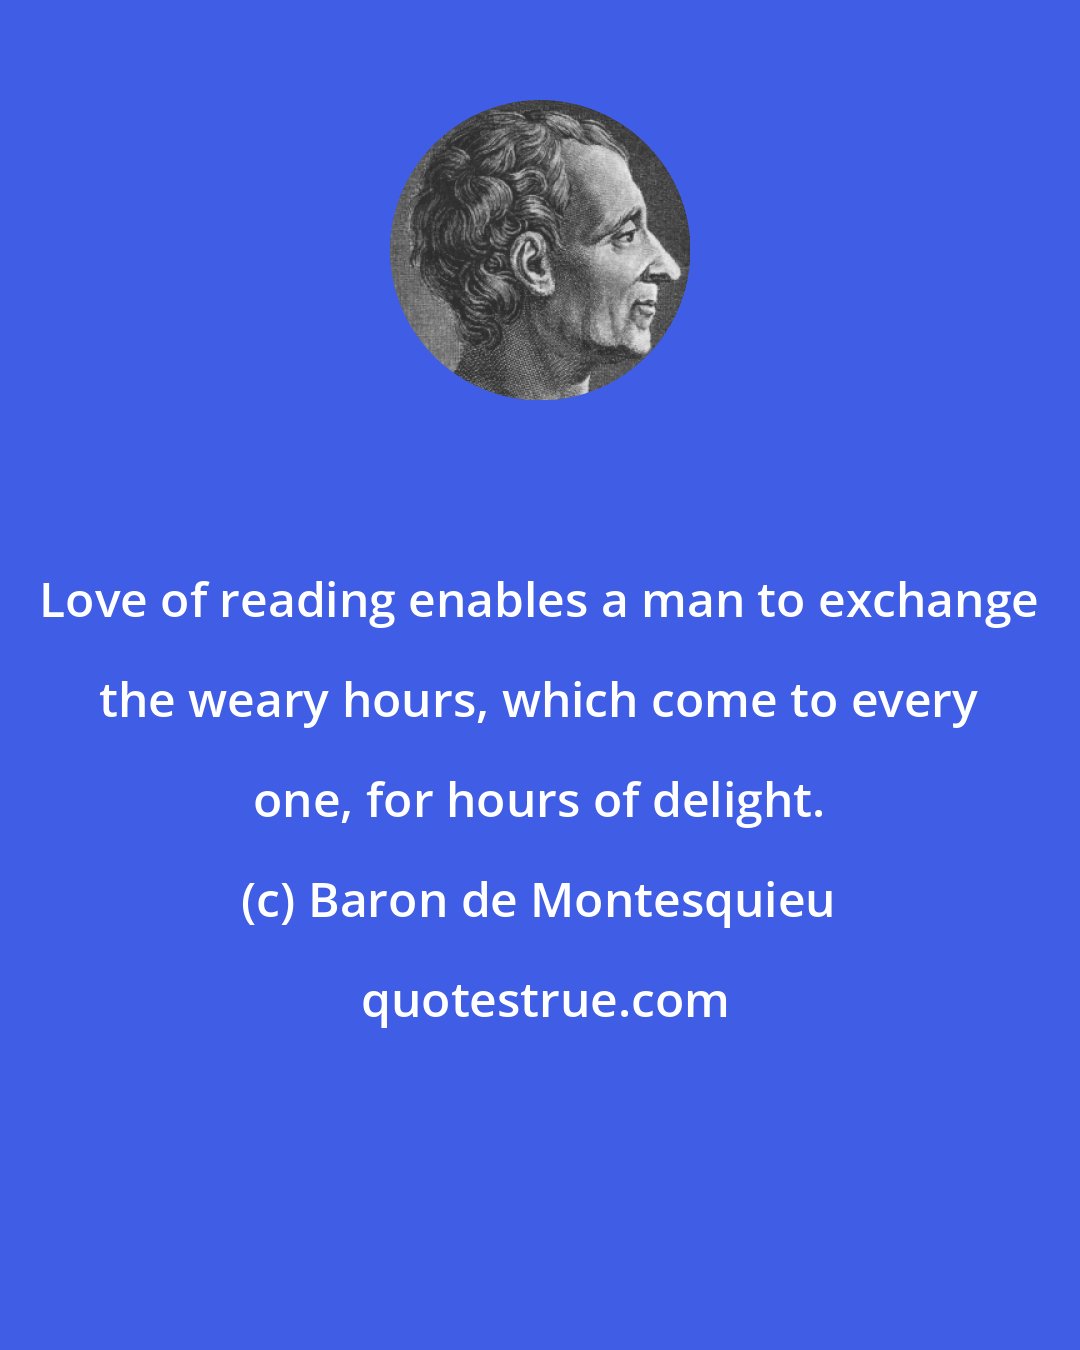 Baron de Montesquieu: Love of reading enables a man to exchange the weary hours, which come to every one, for hours of delight.